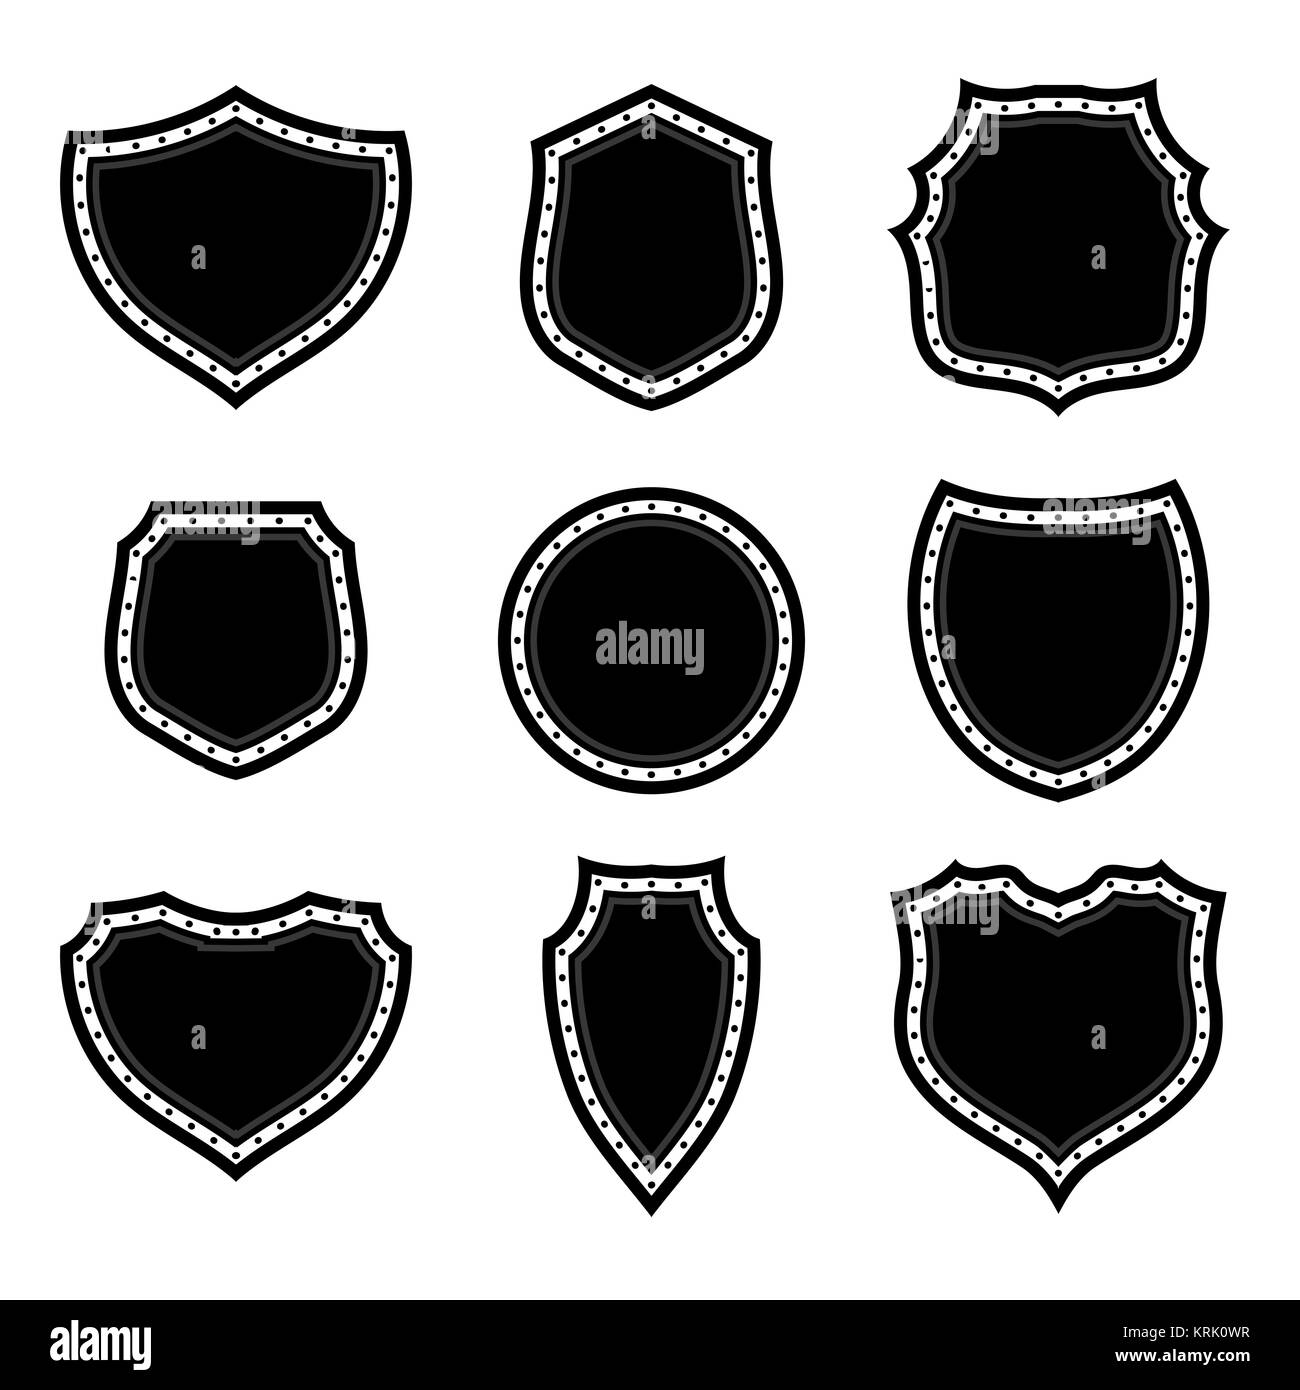 Set of Different Shields Silhouettes Stock Photo